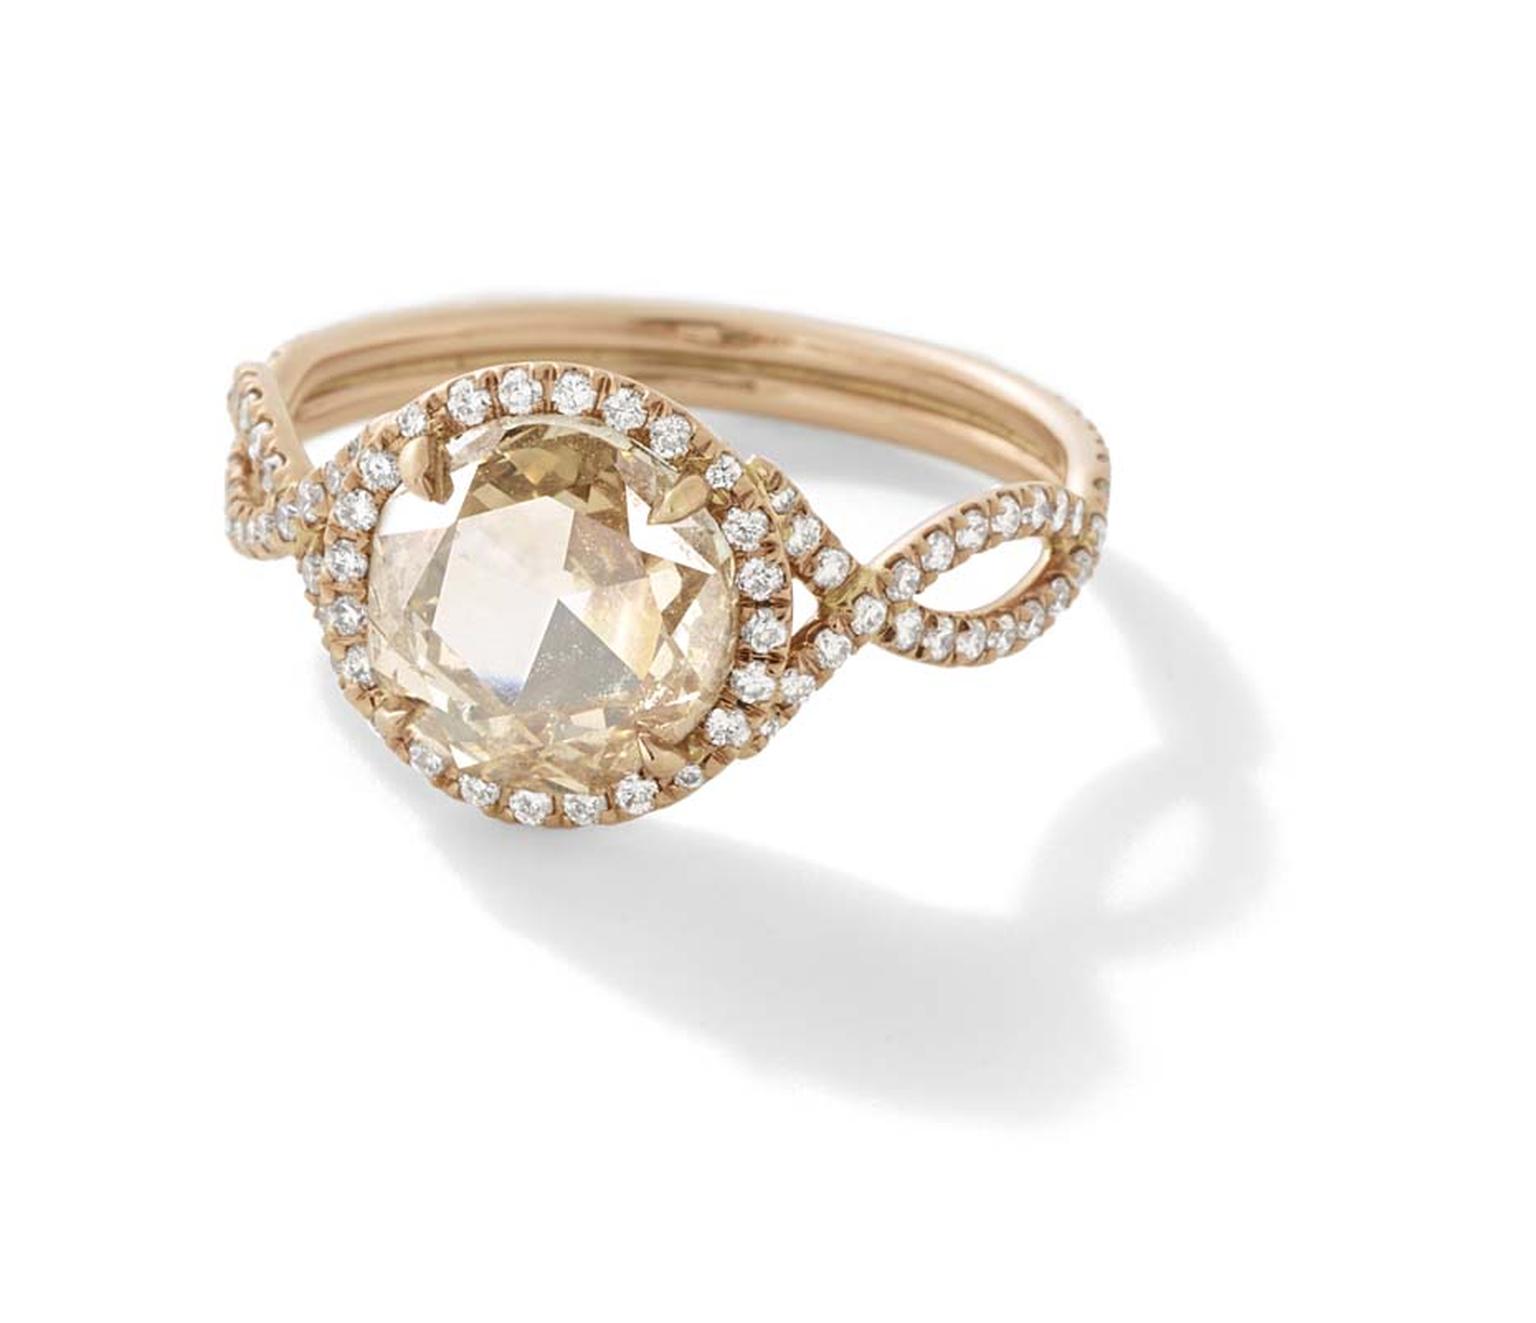 Monique Péan Mineraux engagement ring in recycled rose gold, set with an antique champagne rose cut diamond and diamond pavé ($39,690)